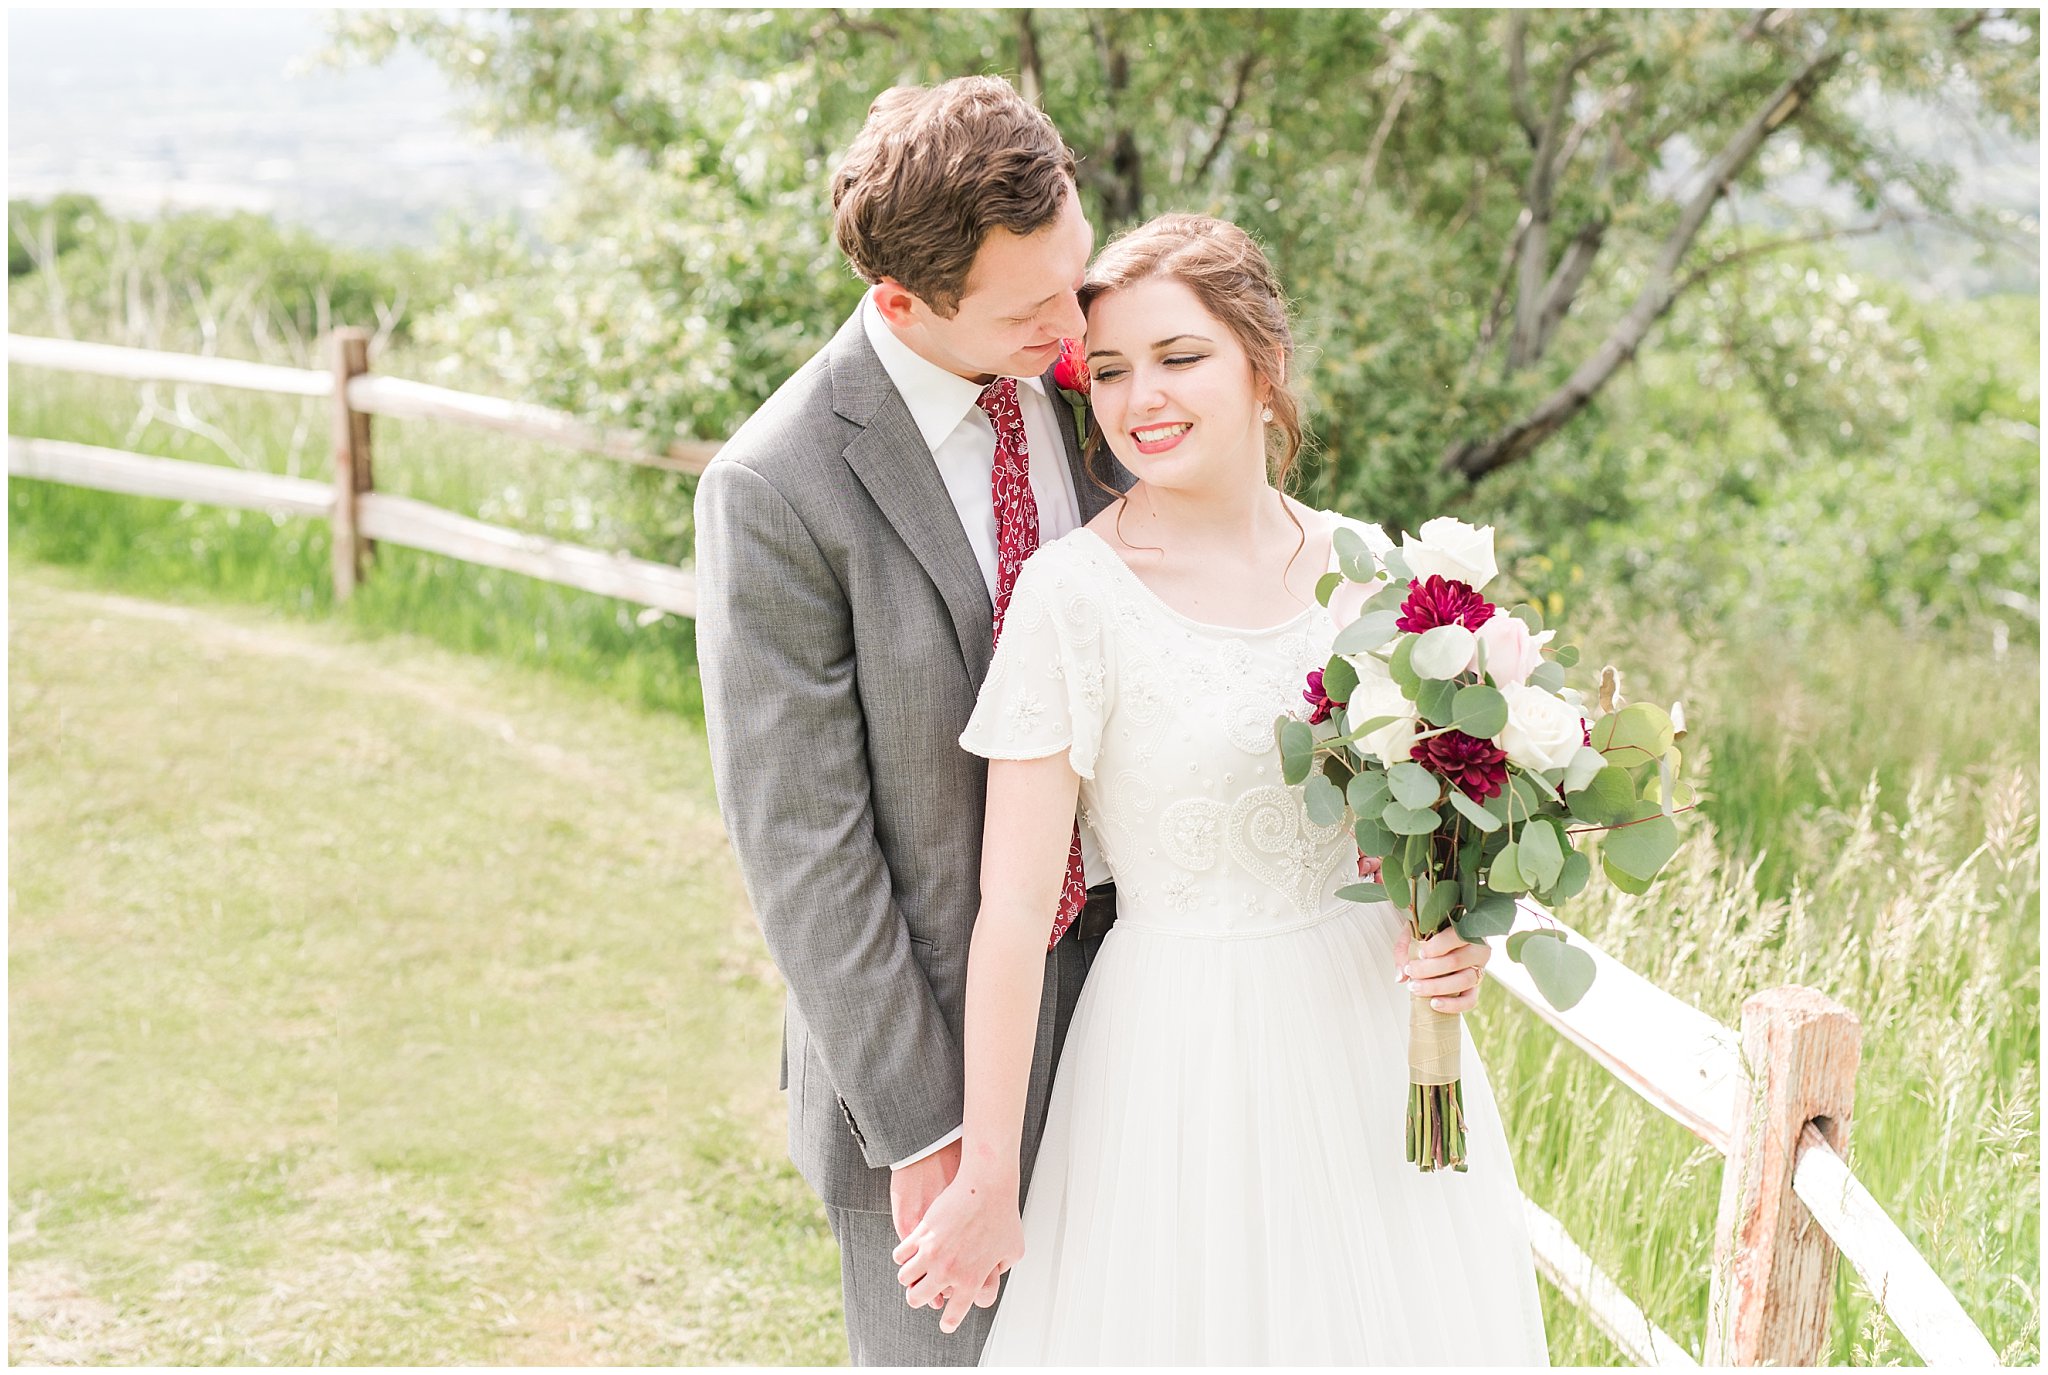 Bride and groom portraits with white fence | Grey, Burgundy, and Gold Wedding | Draper Temple and South Mountain Wedding | Utah Wedding Photographers | Jessie and Dallin Photography